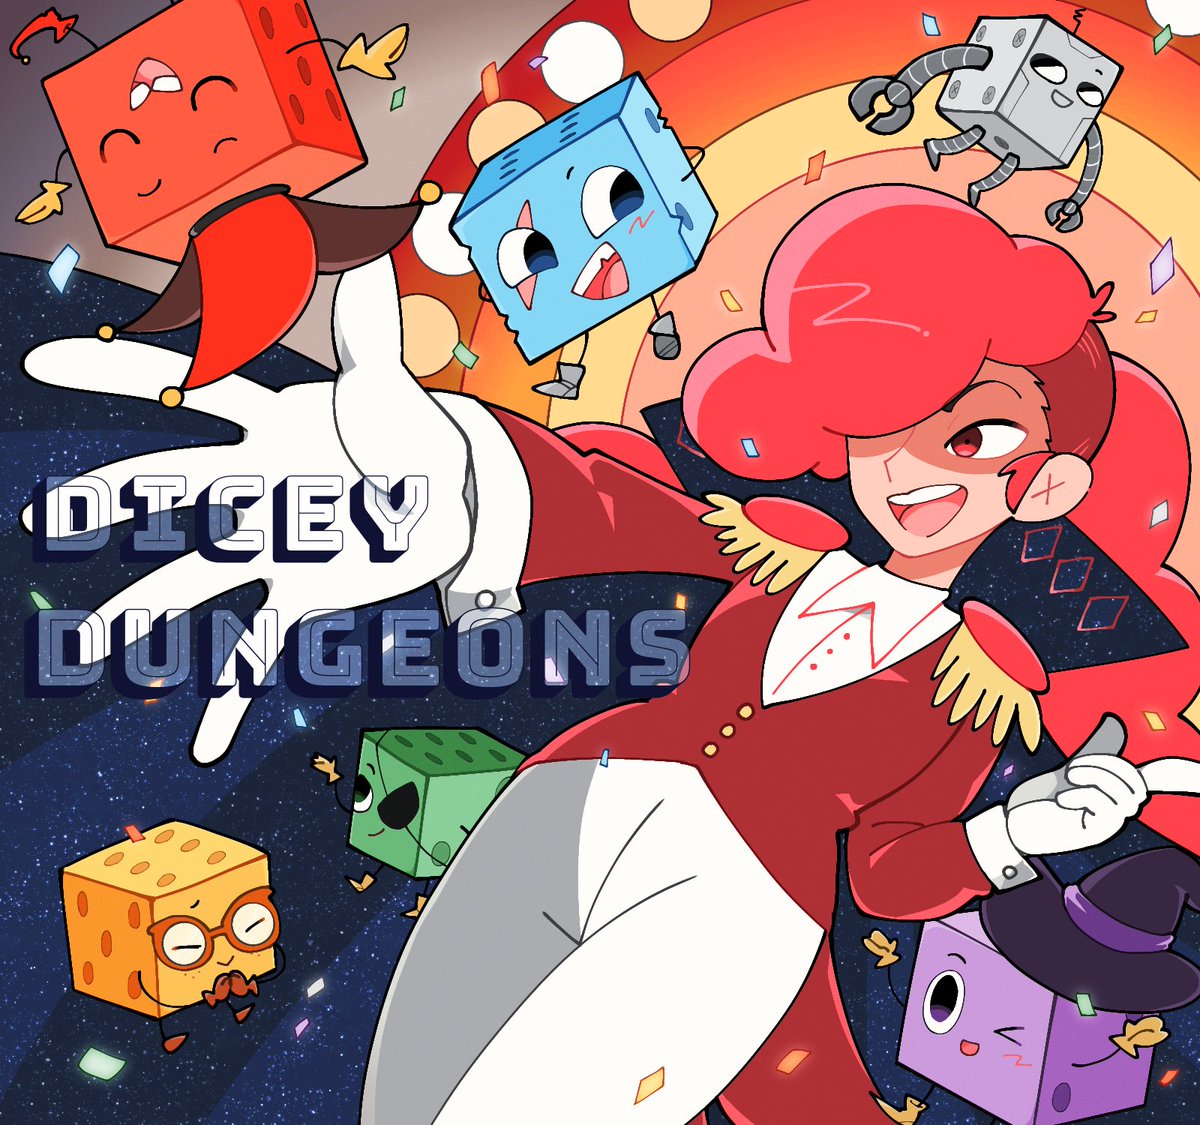 Dungeons nintendo switch. Dicey Dungeons. Леди удача Dicey Dungeons. Dicey Dungeons Nintendo Switch. Шут Dicey Dungeons.